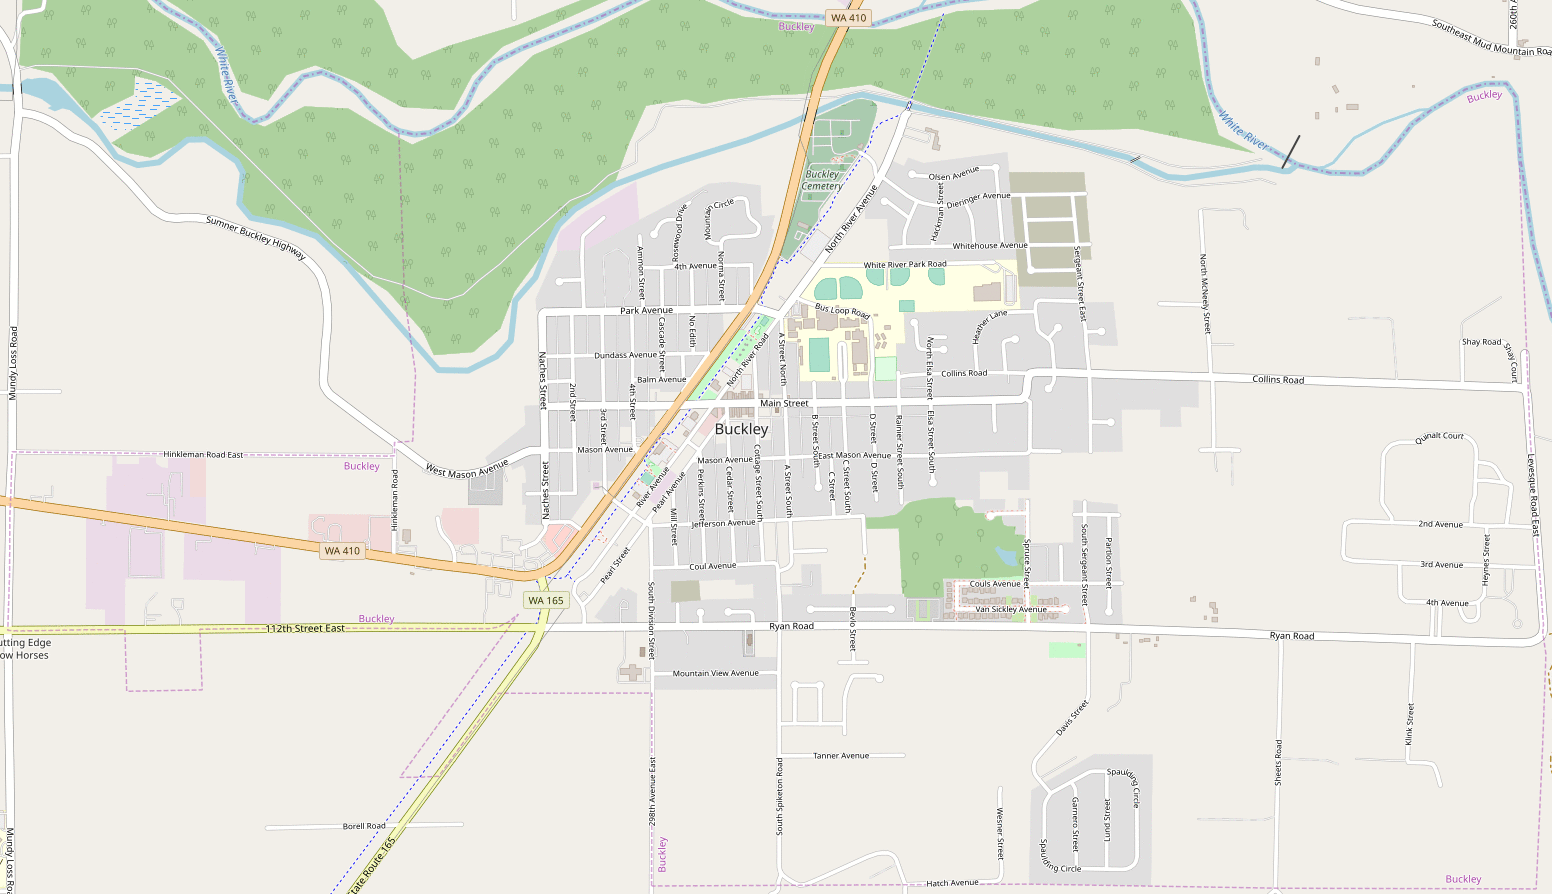 mapping of buildings in Buckley, WA, USA in OpenStreetMap